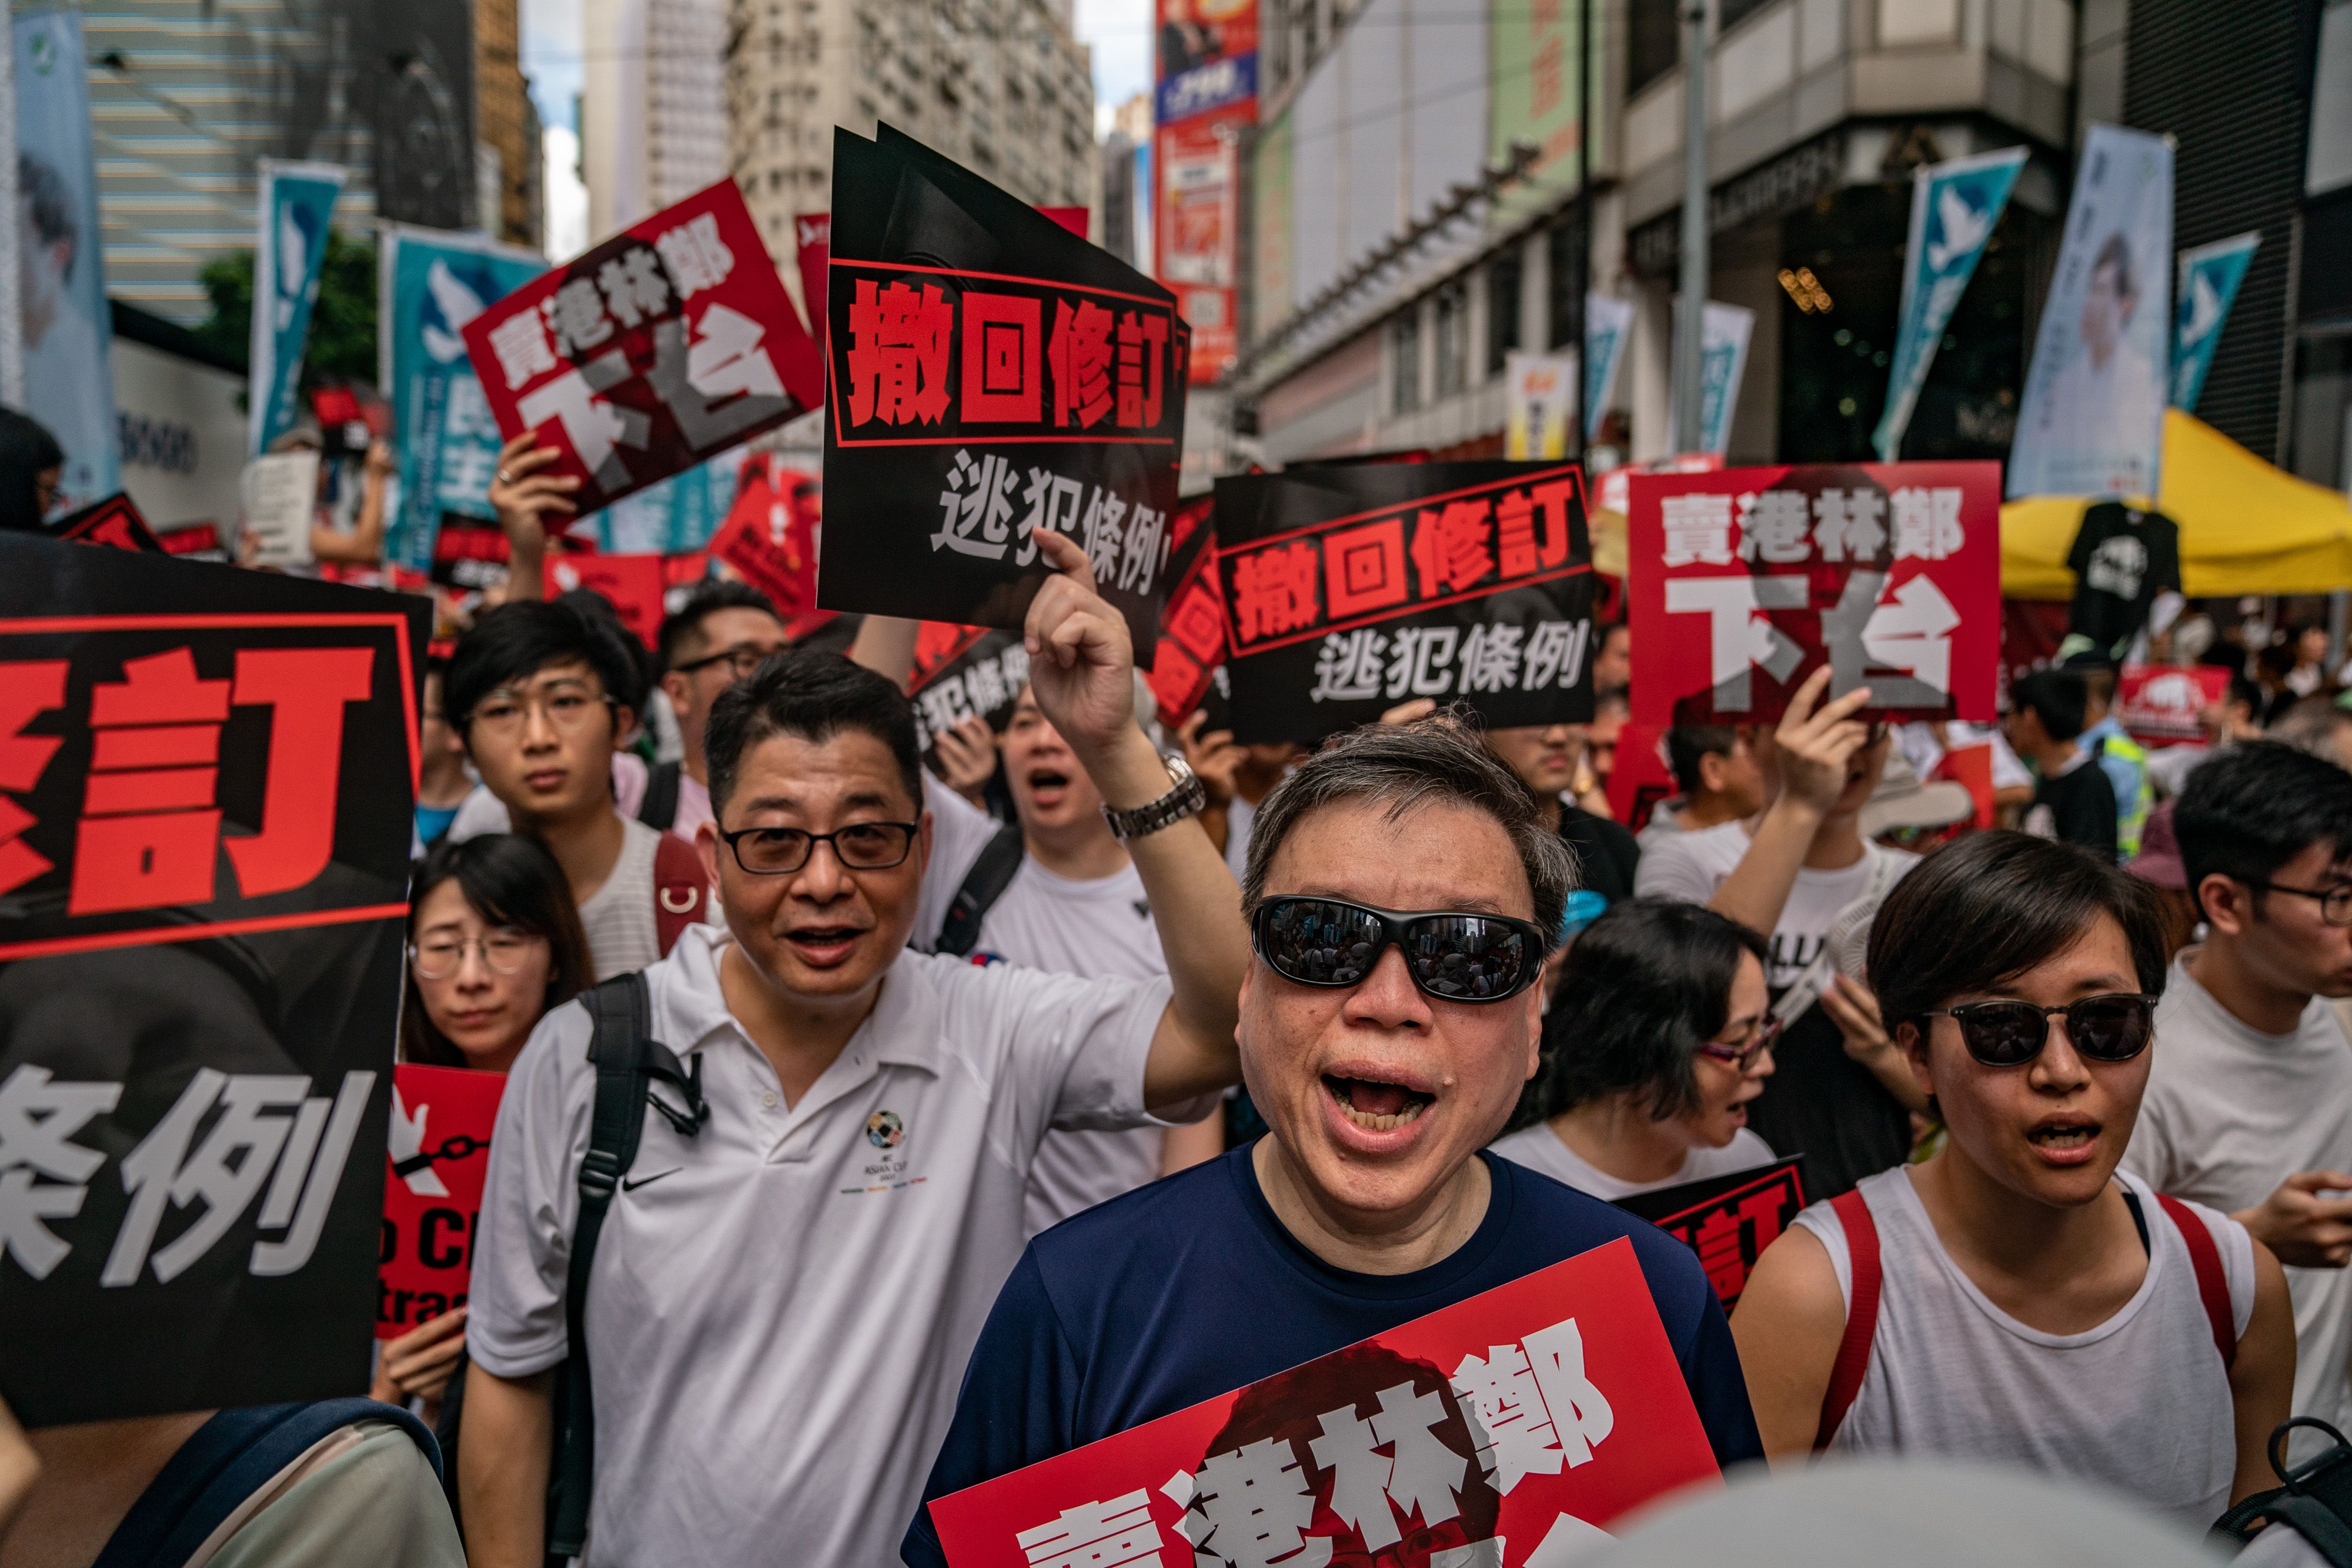 Protesters hold placards and shout slogans during a rally